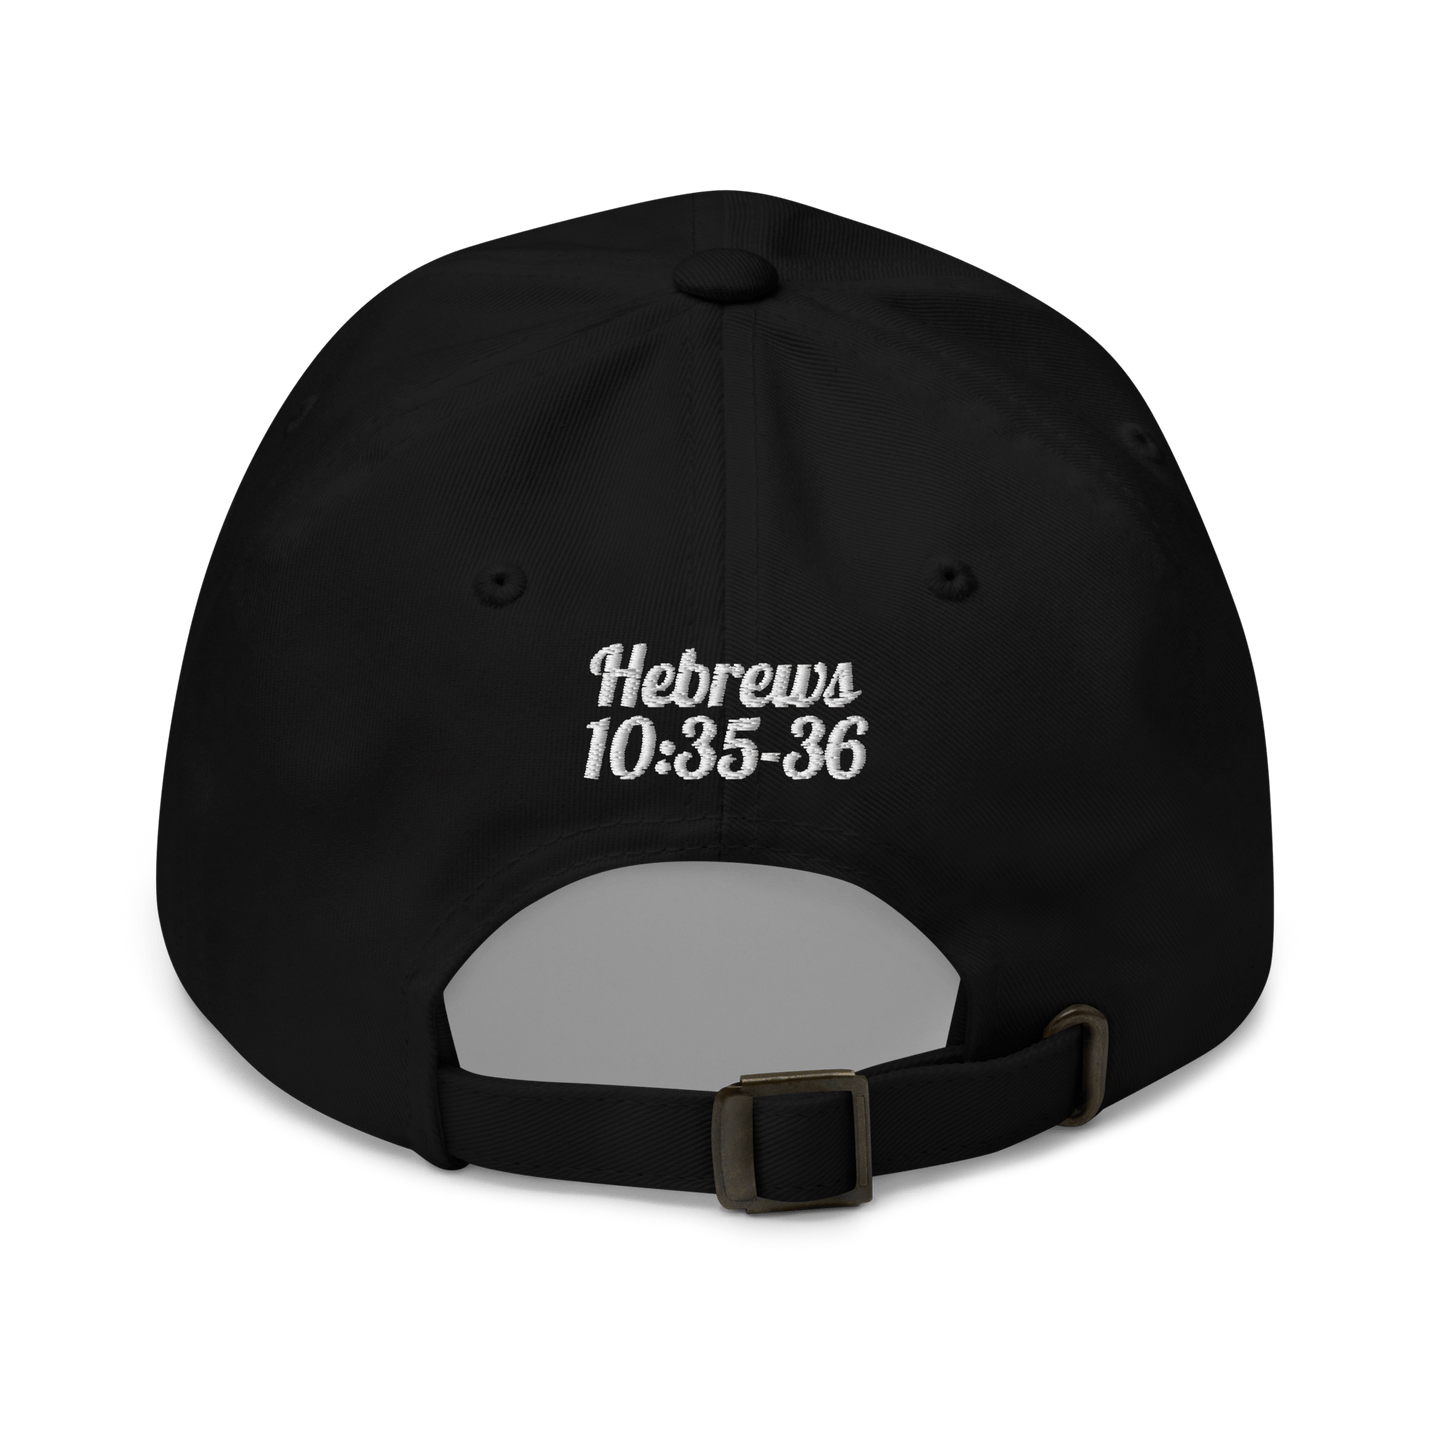 Load image into Gallery viewer, Wow God !® Black Dad Hat
